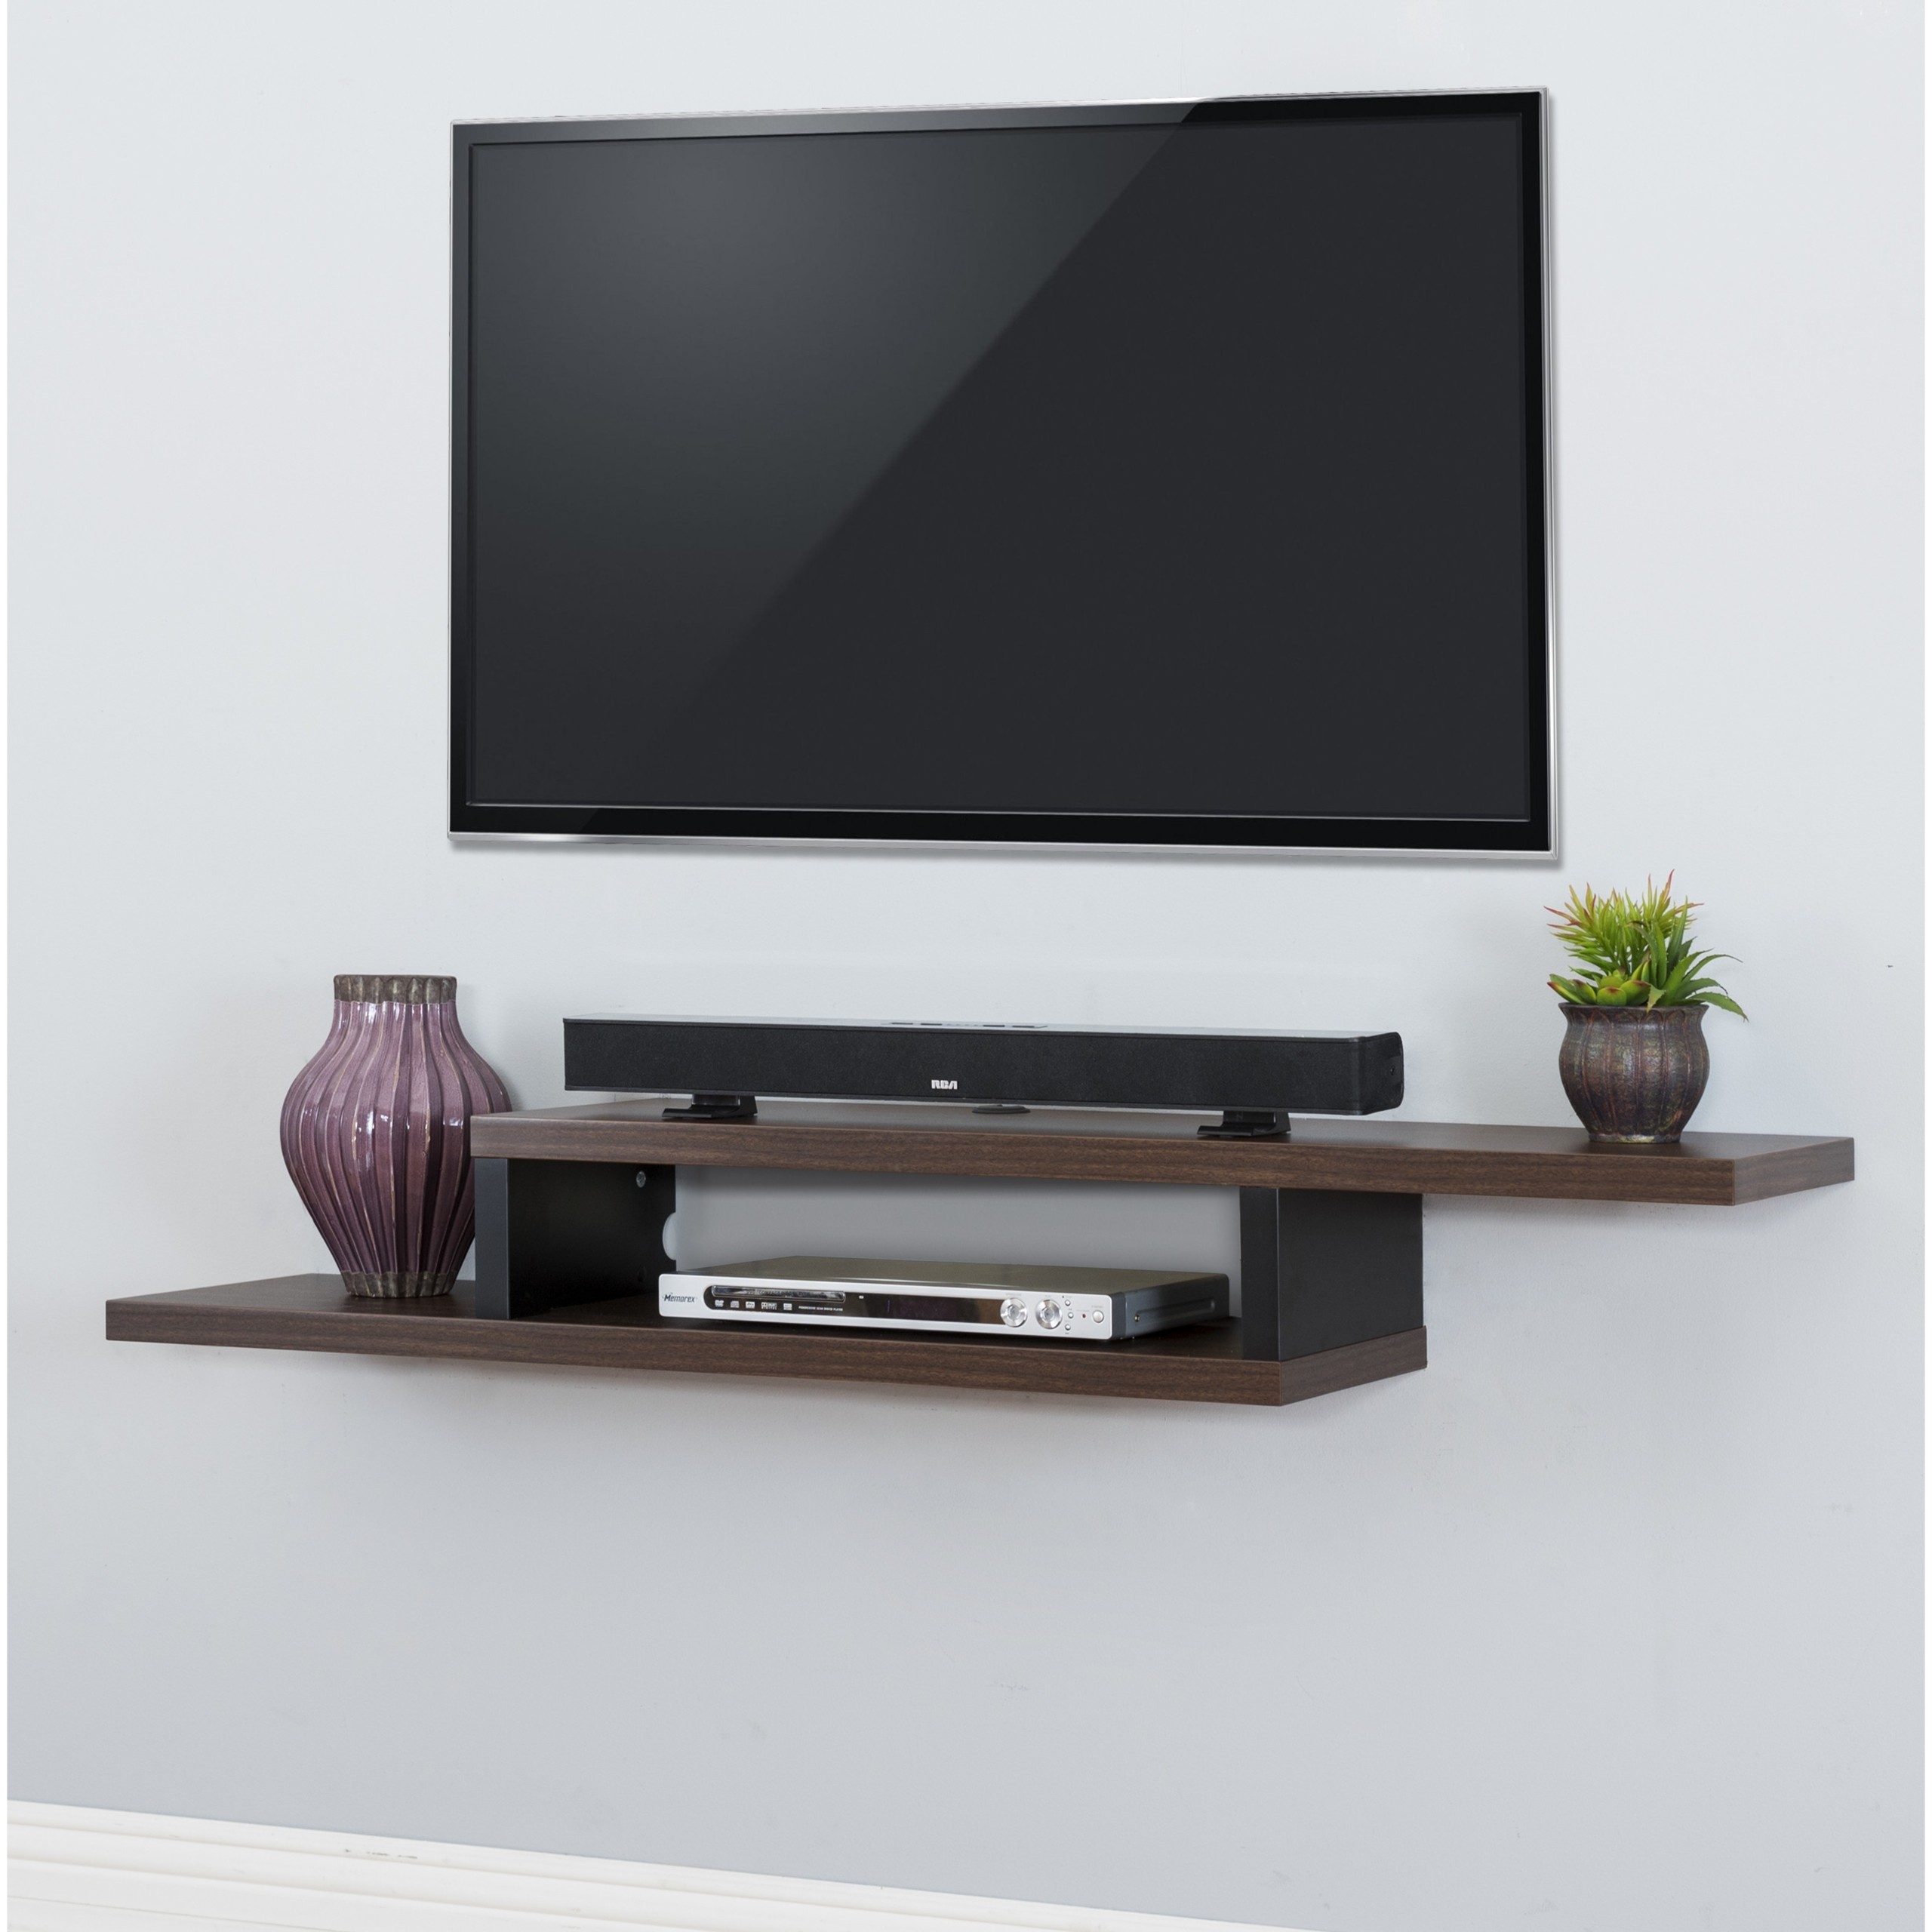 15 best collection of flat screen shelving